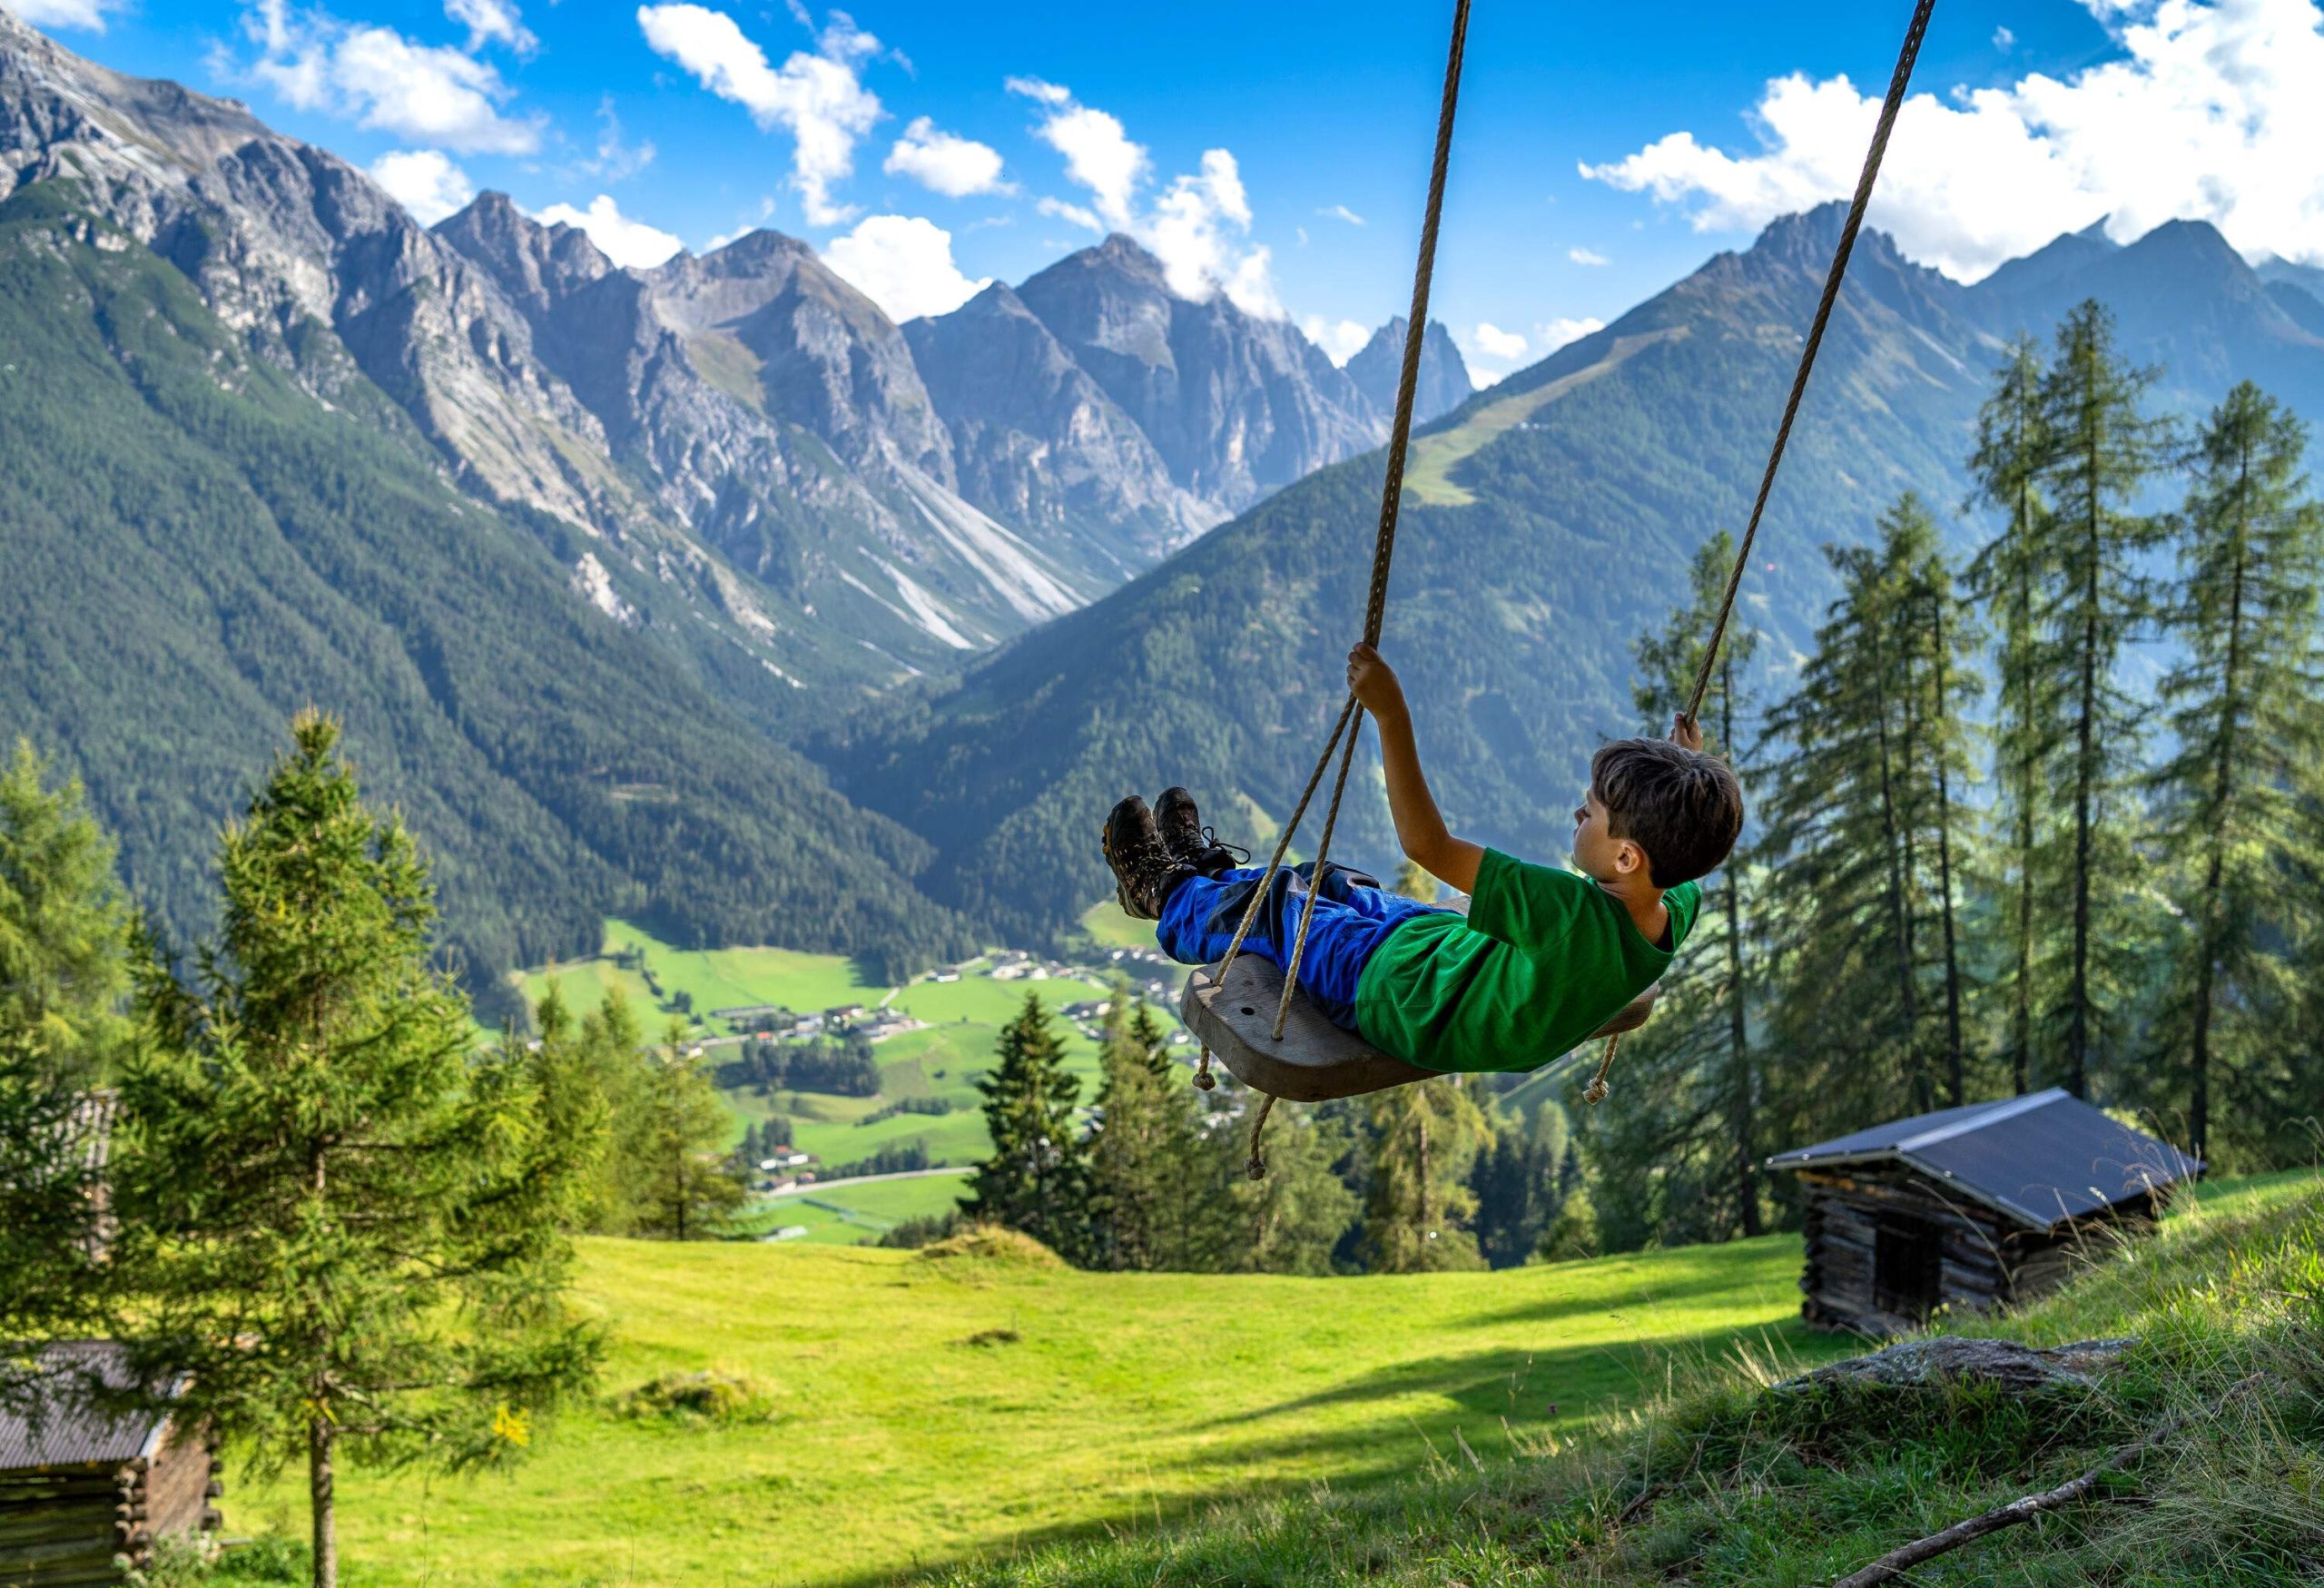 A young boy in a green shirt playing on a swing with views of lush meadows and craggy mountains.